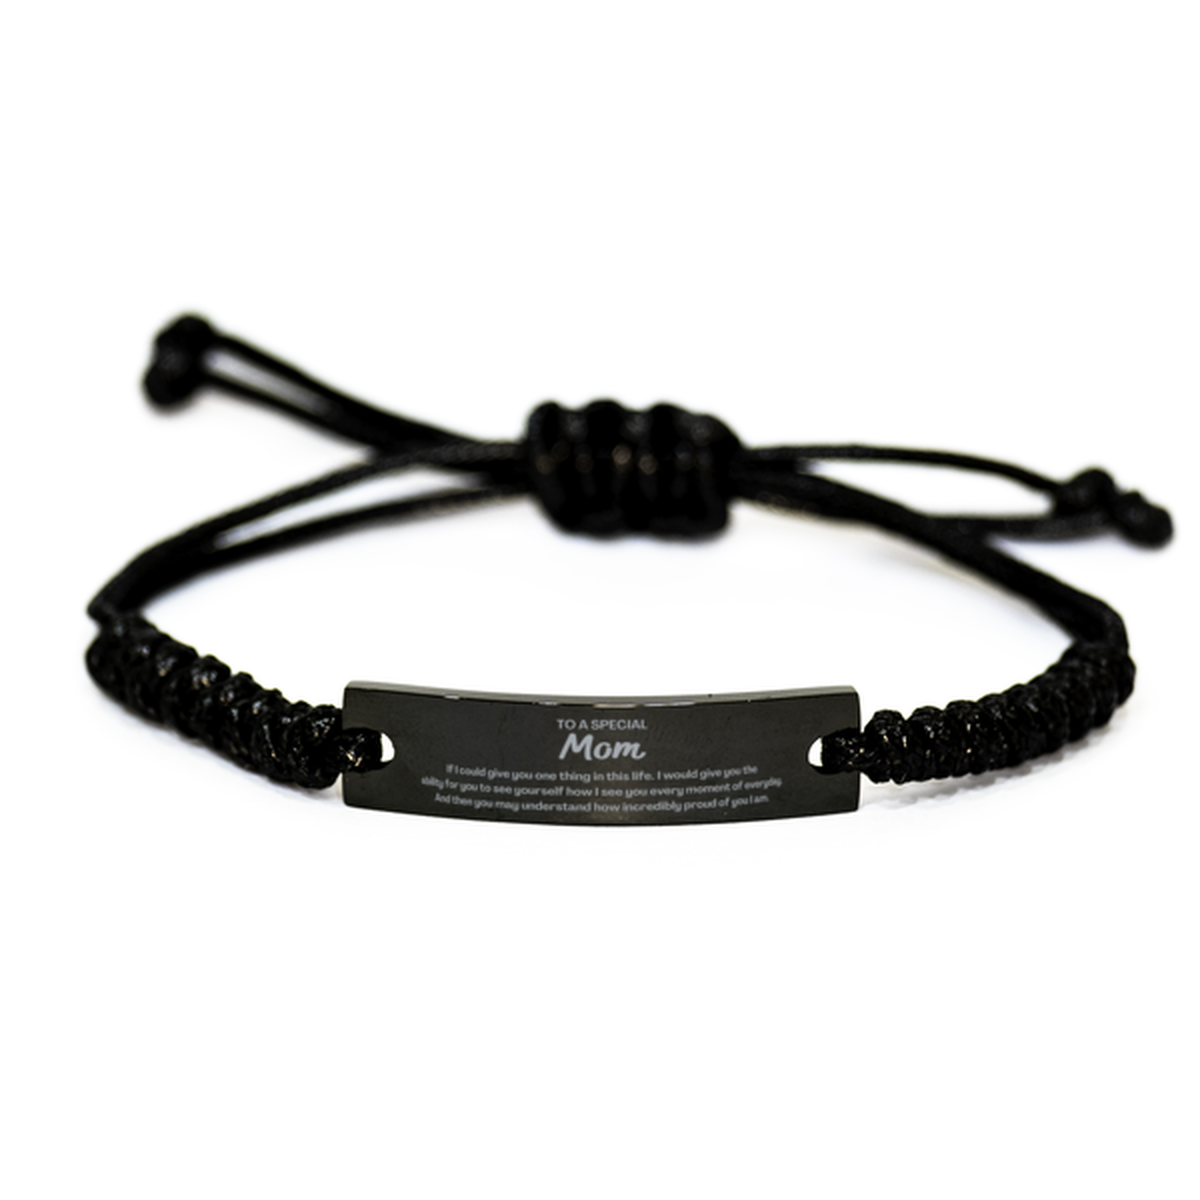 To My Mom Black Rope Bracelet, Gifts For Mom Engraved, Inspirational Gifts for Christmas Birthday, Epic Gifts for Mom To A Special Mom how incredibly proud of you I am